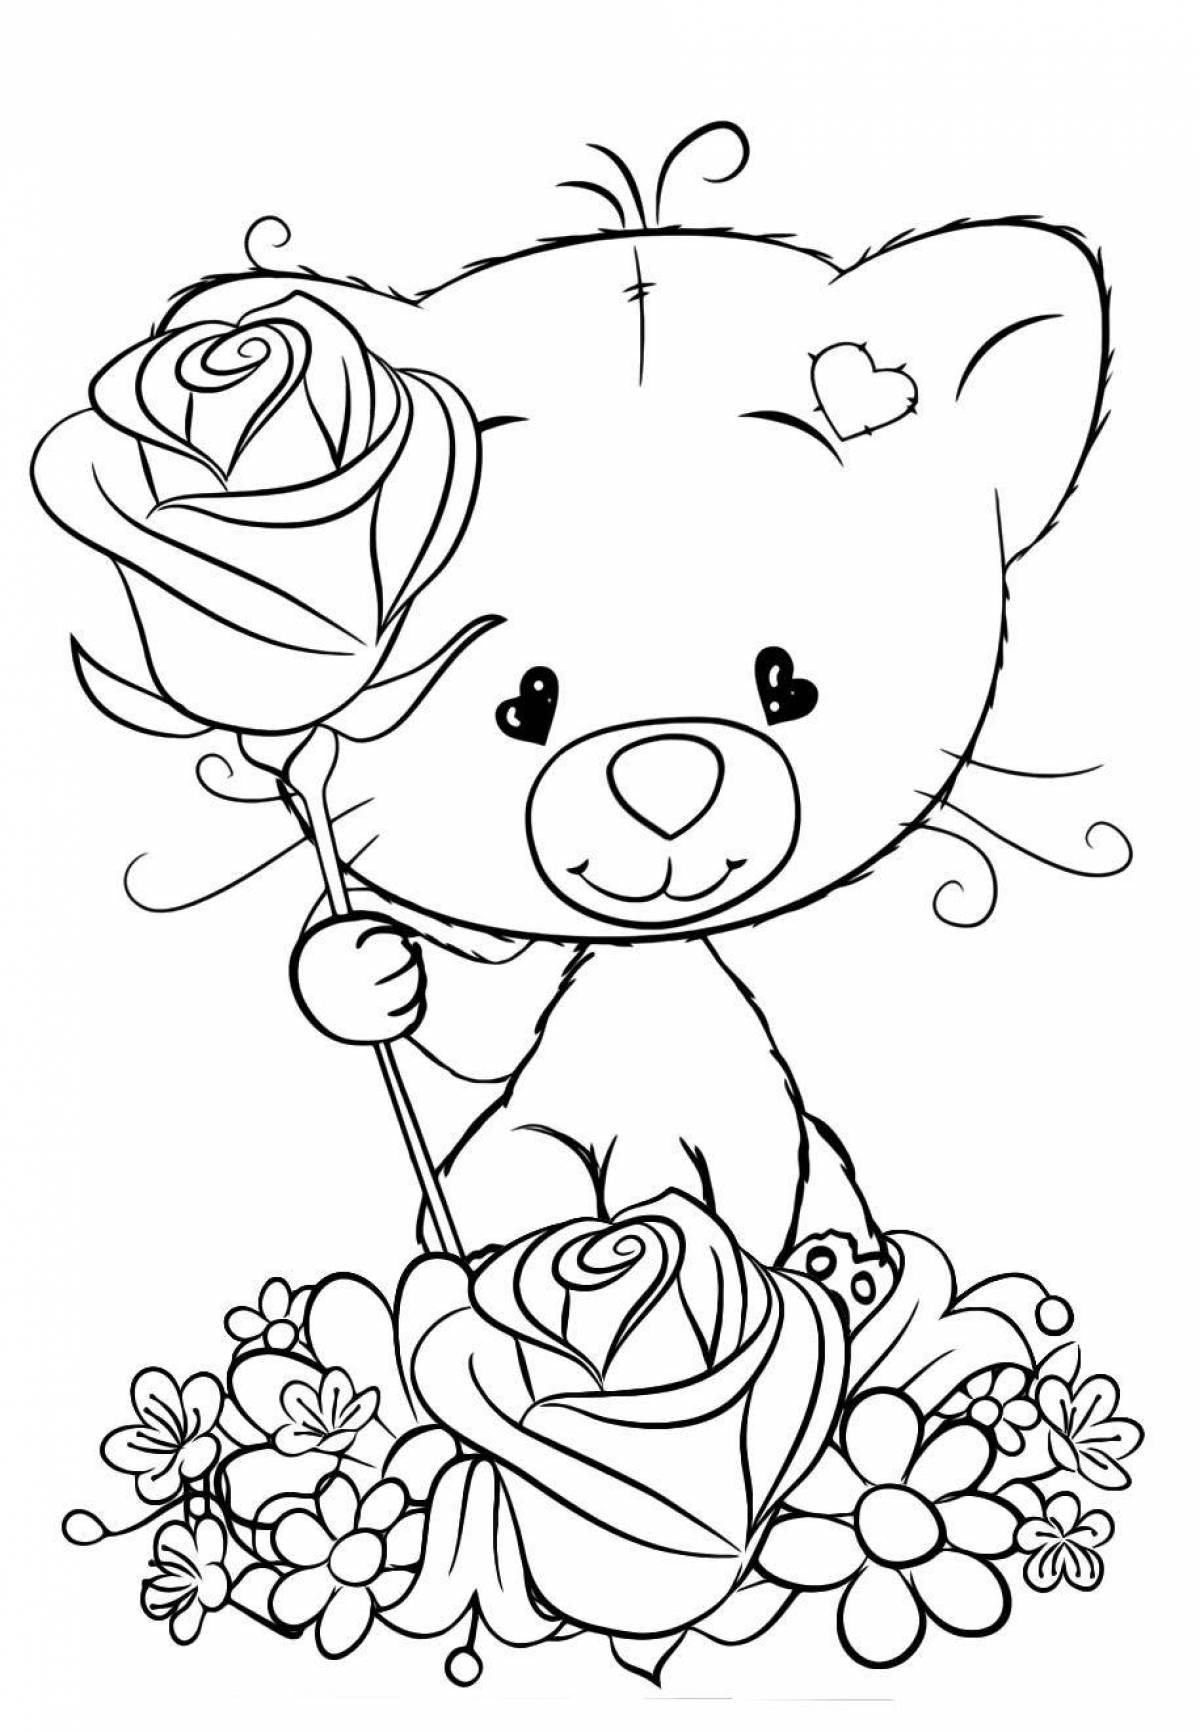 Adorable coloring book for girls, beautiful and cute